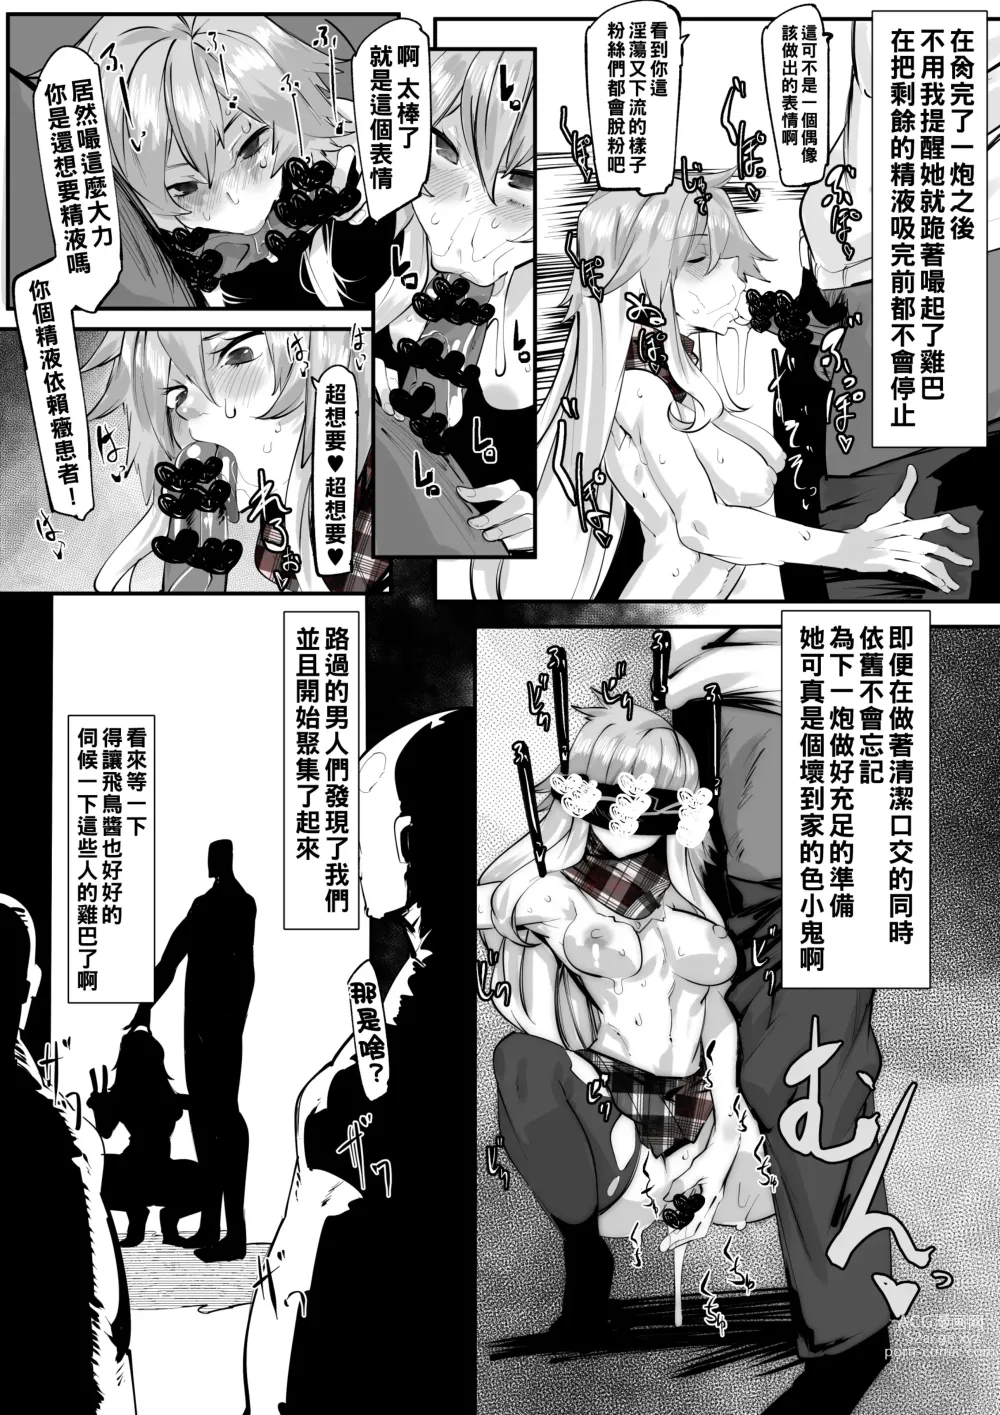 Page 139 of doujinshi 合輯（Chinese）